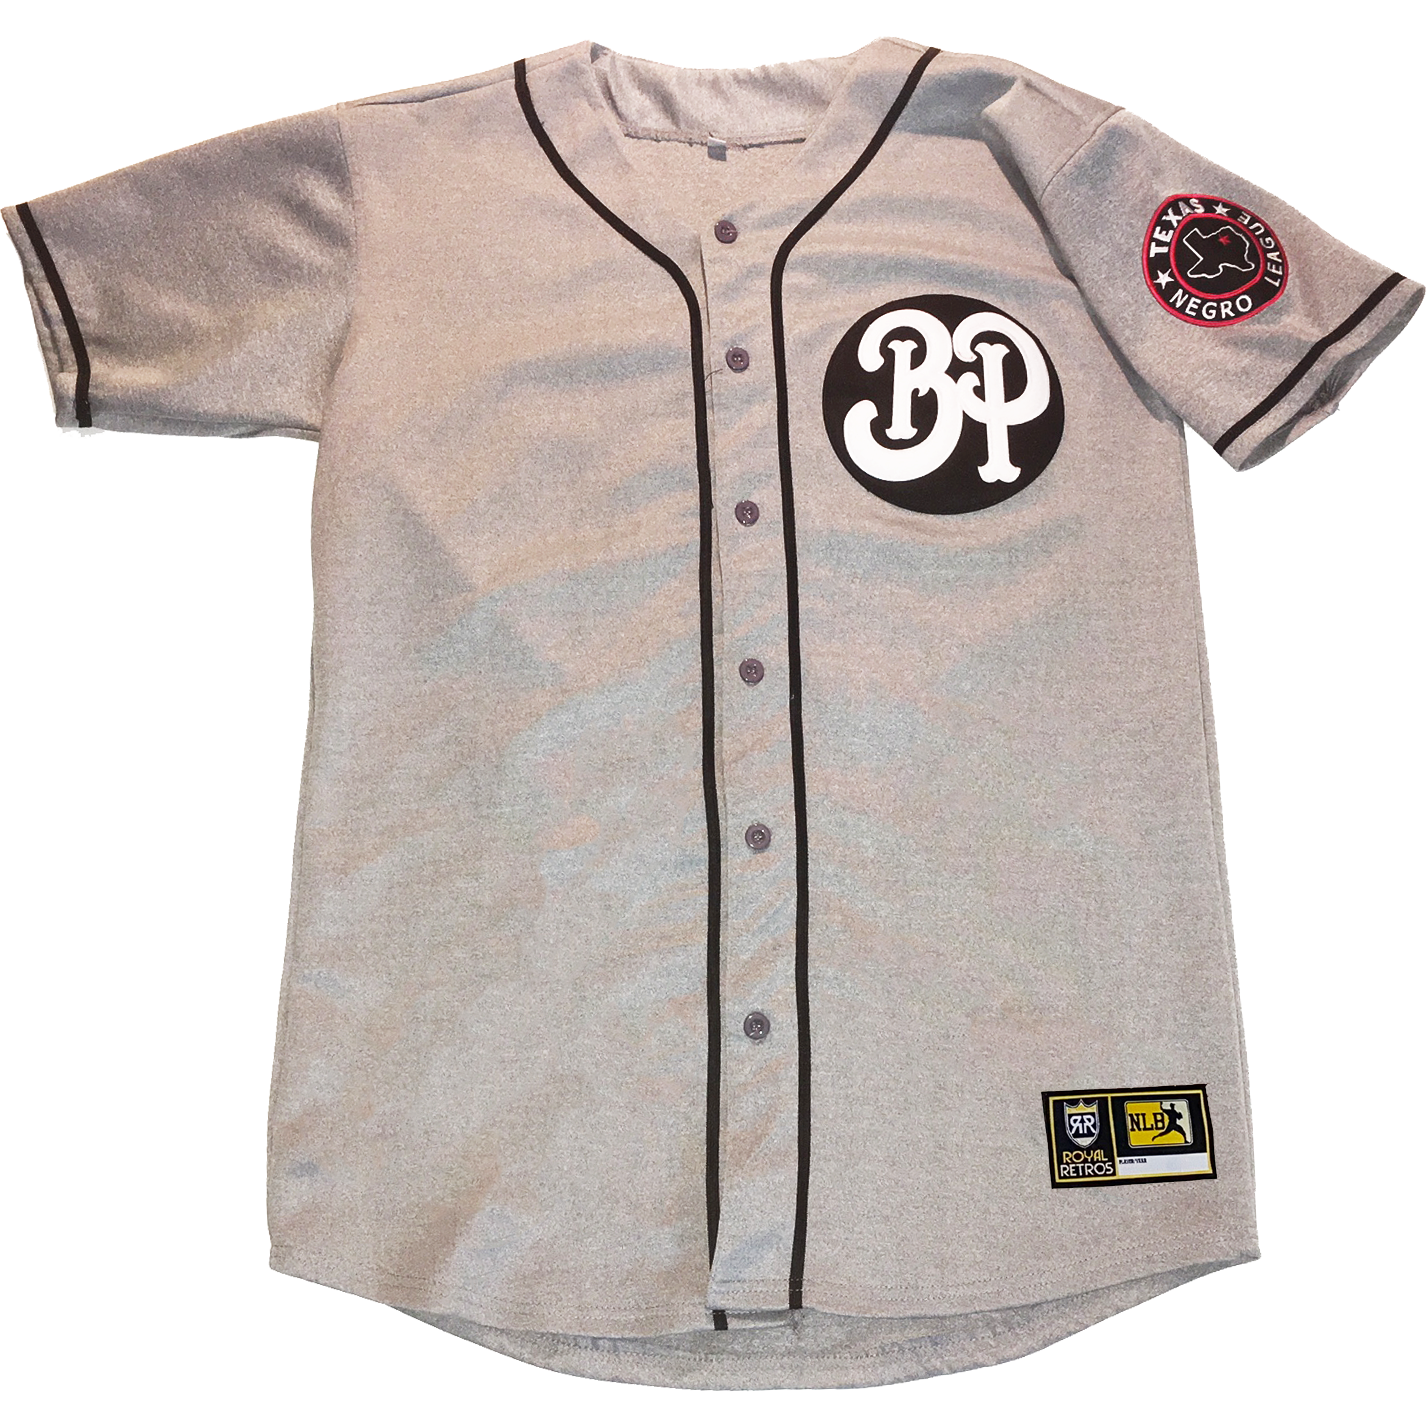 fort worth black panthers negro league jersey